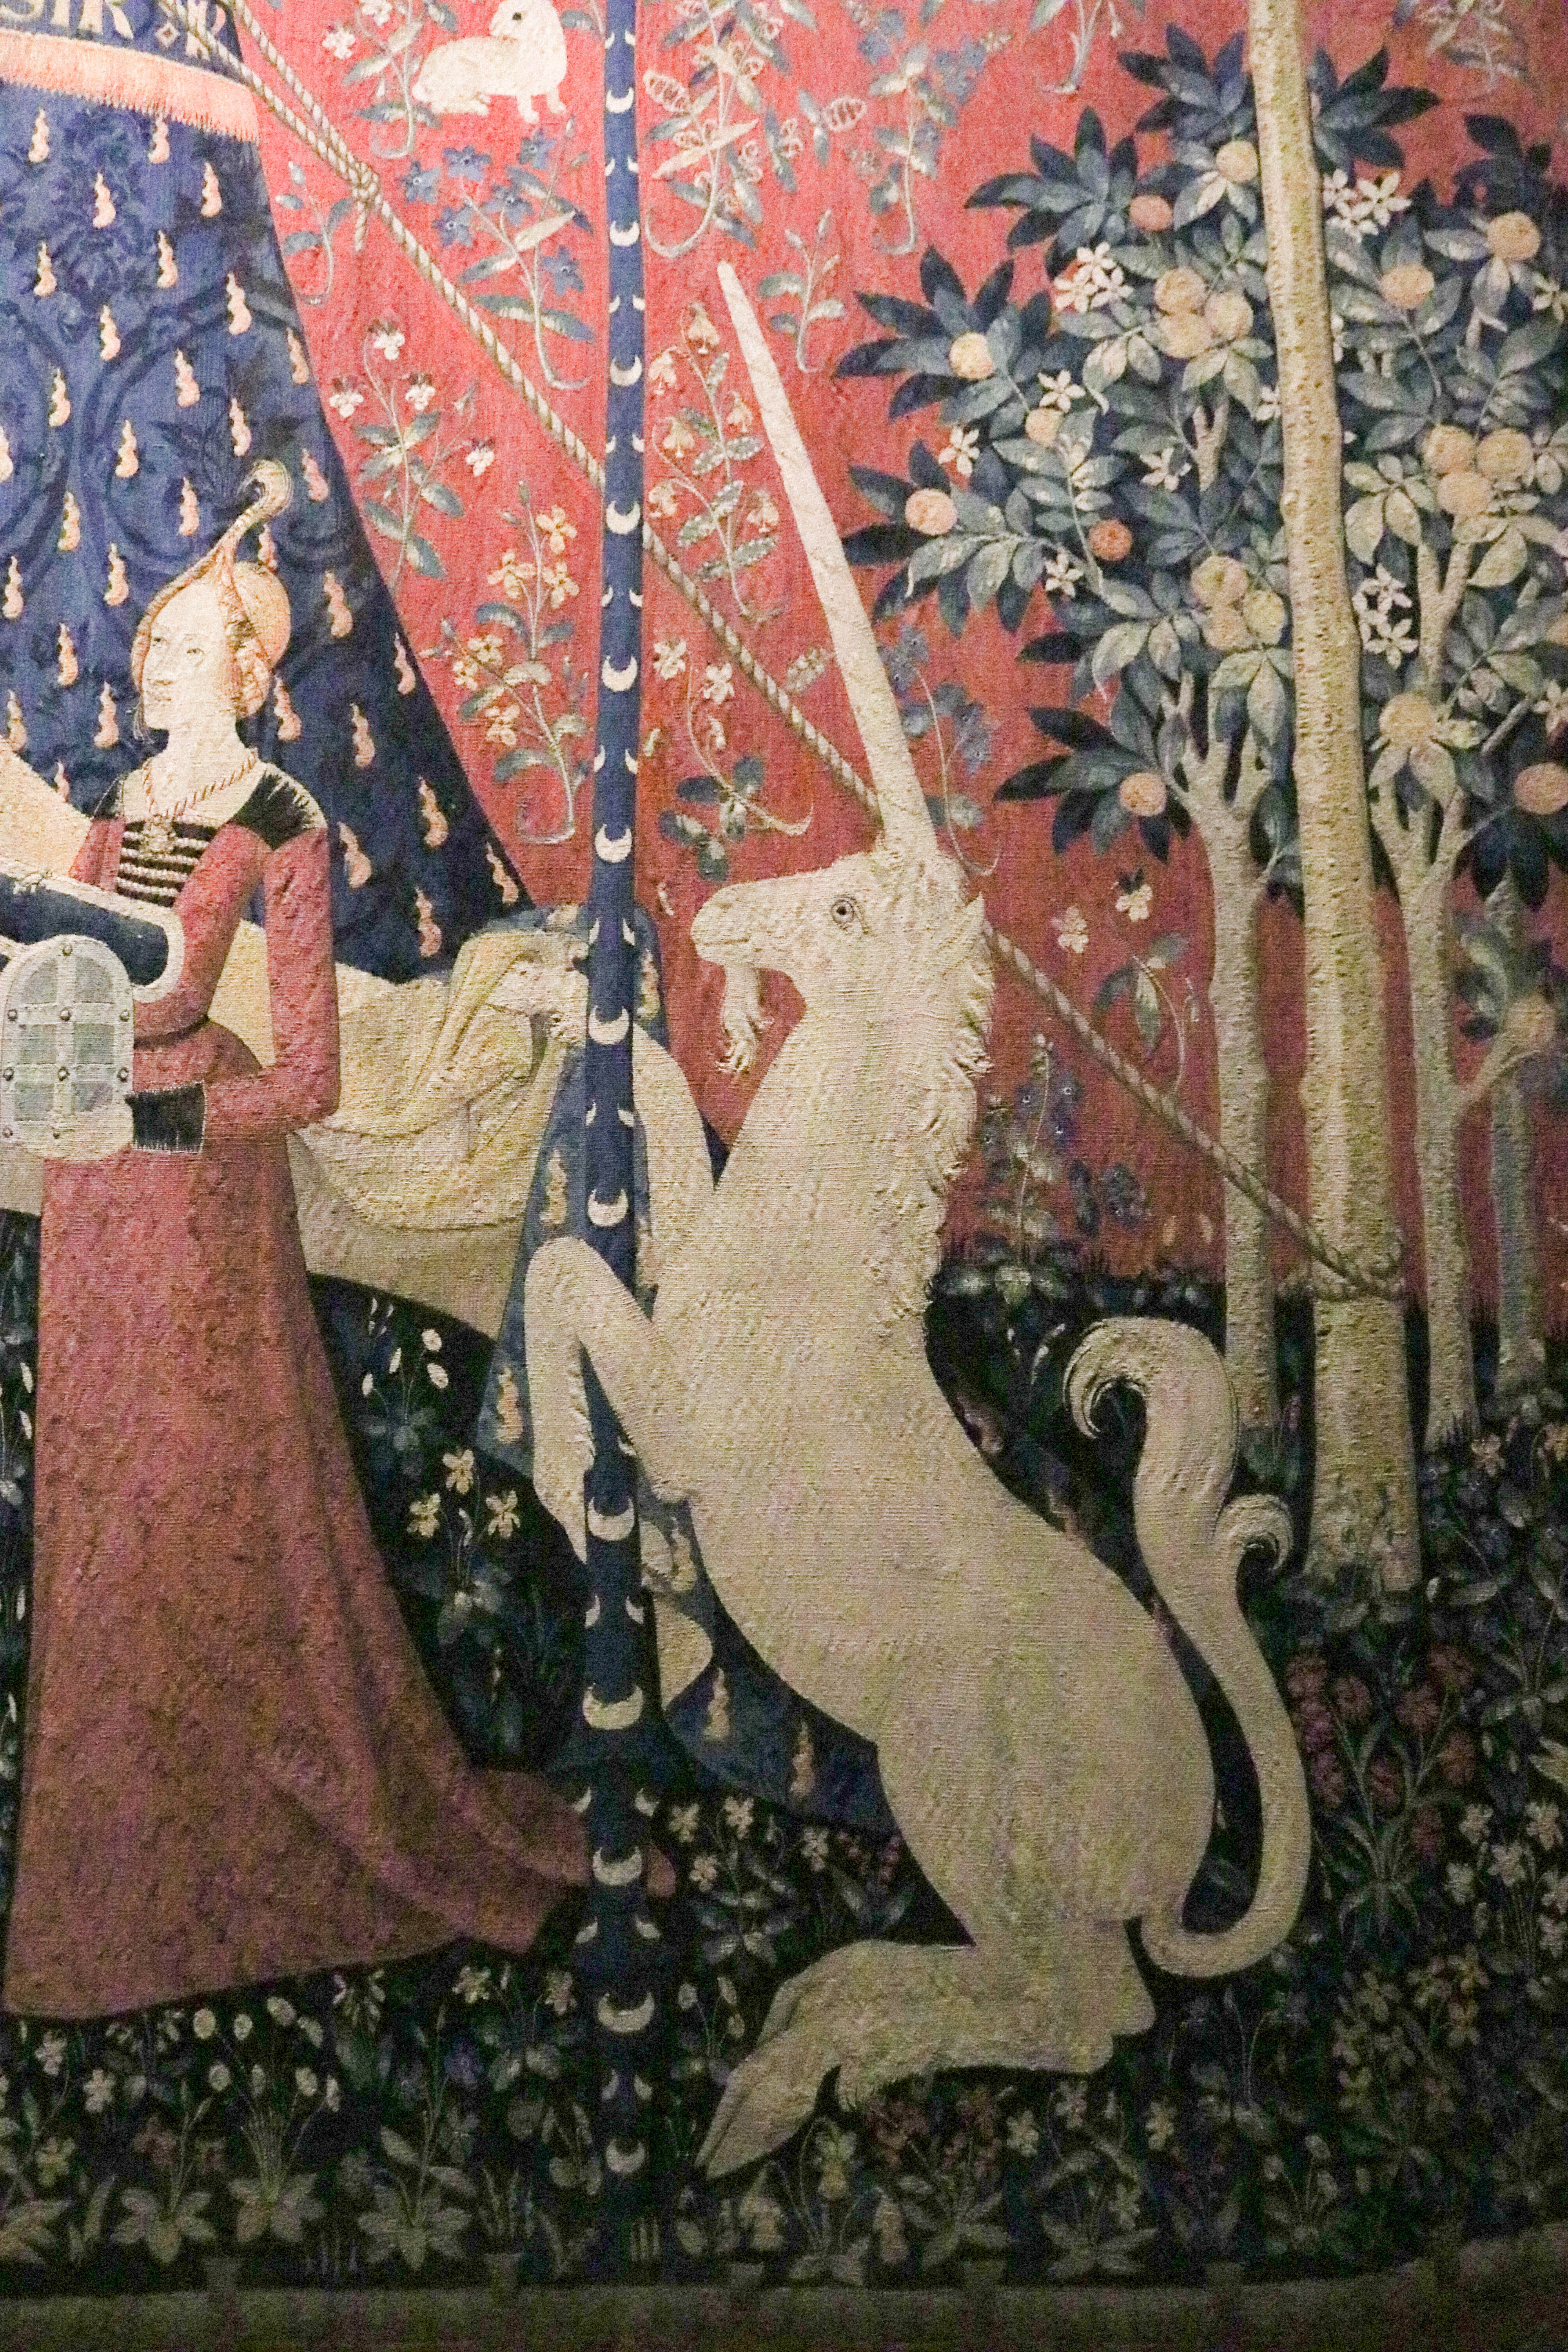 the Lady and the Unicorn